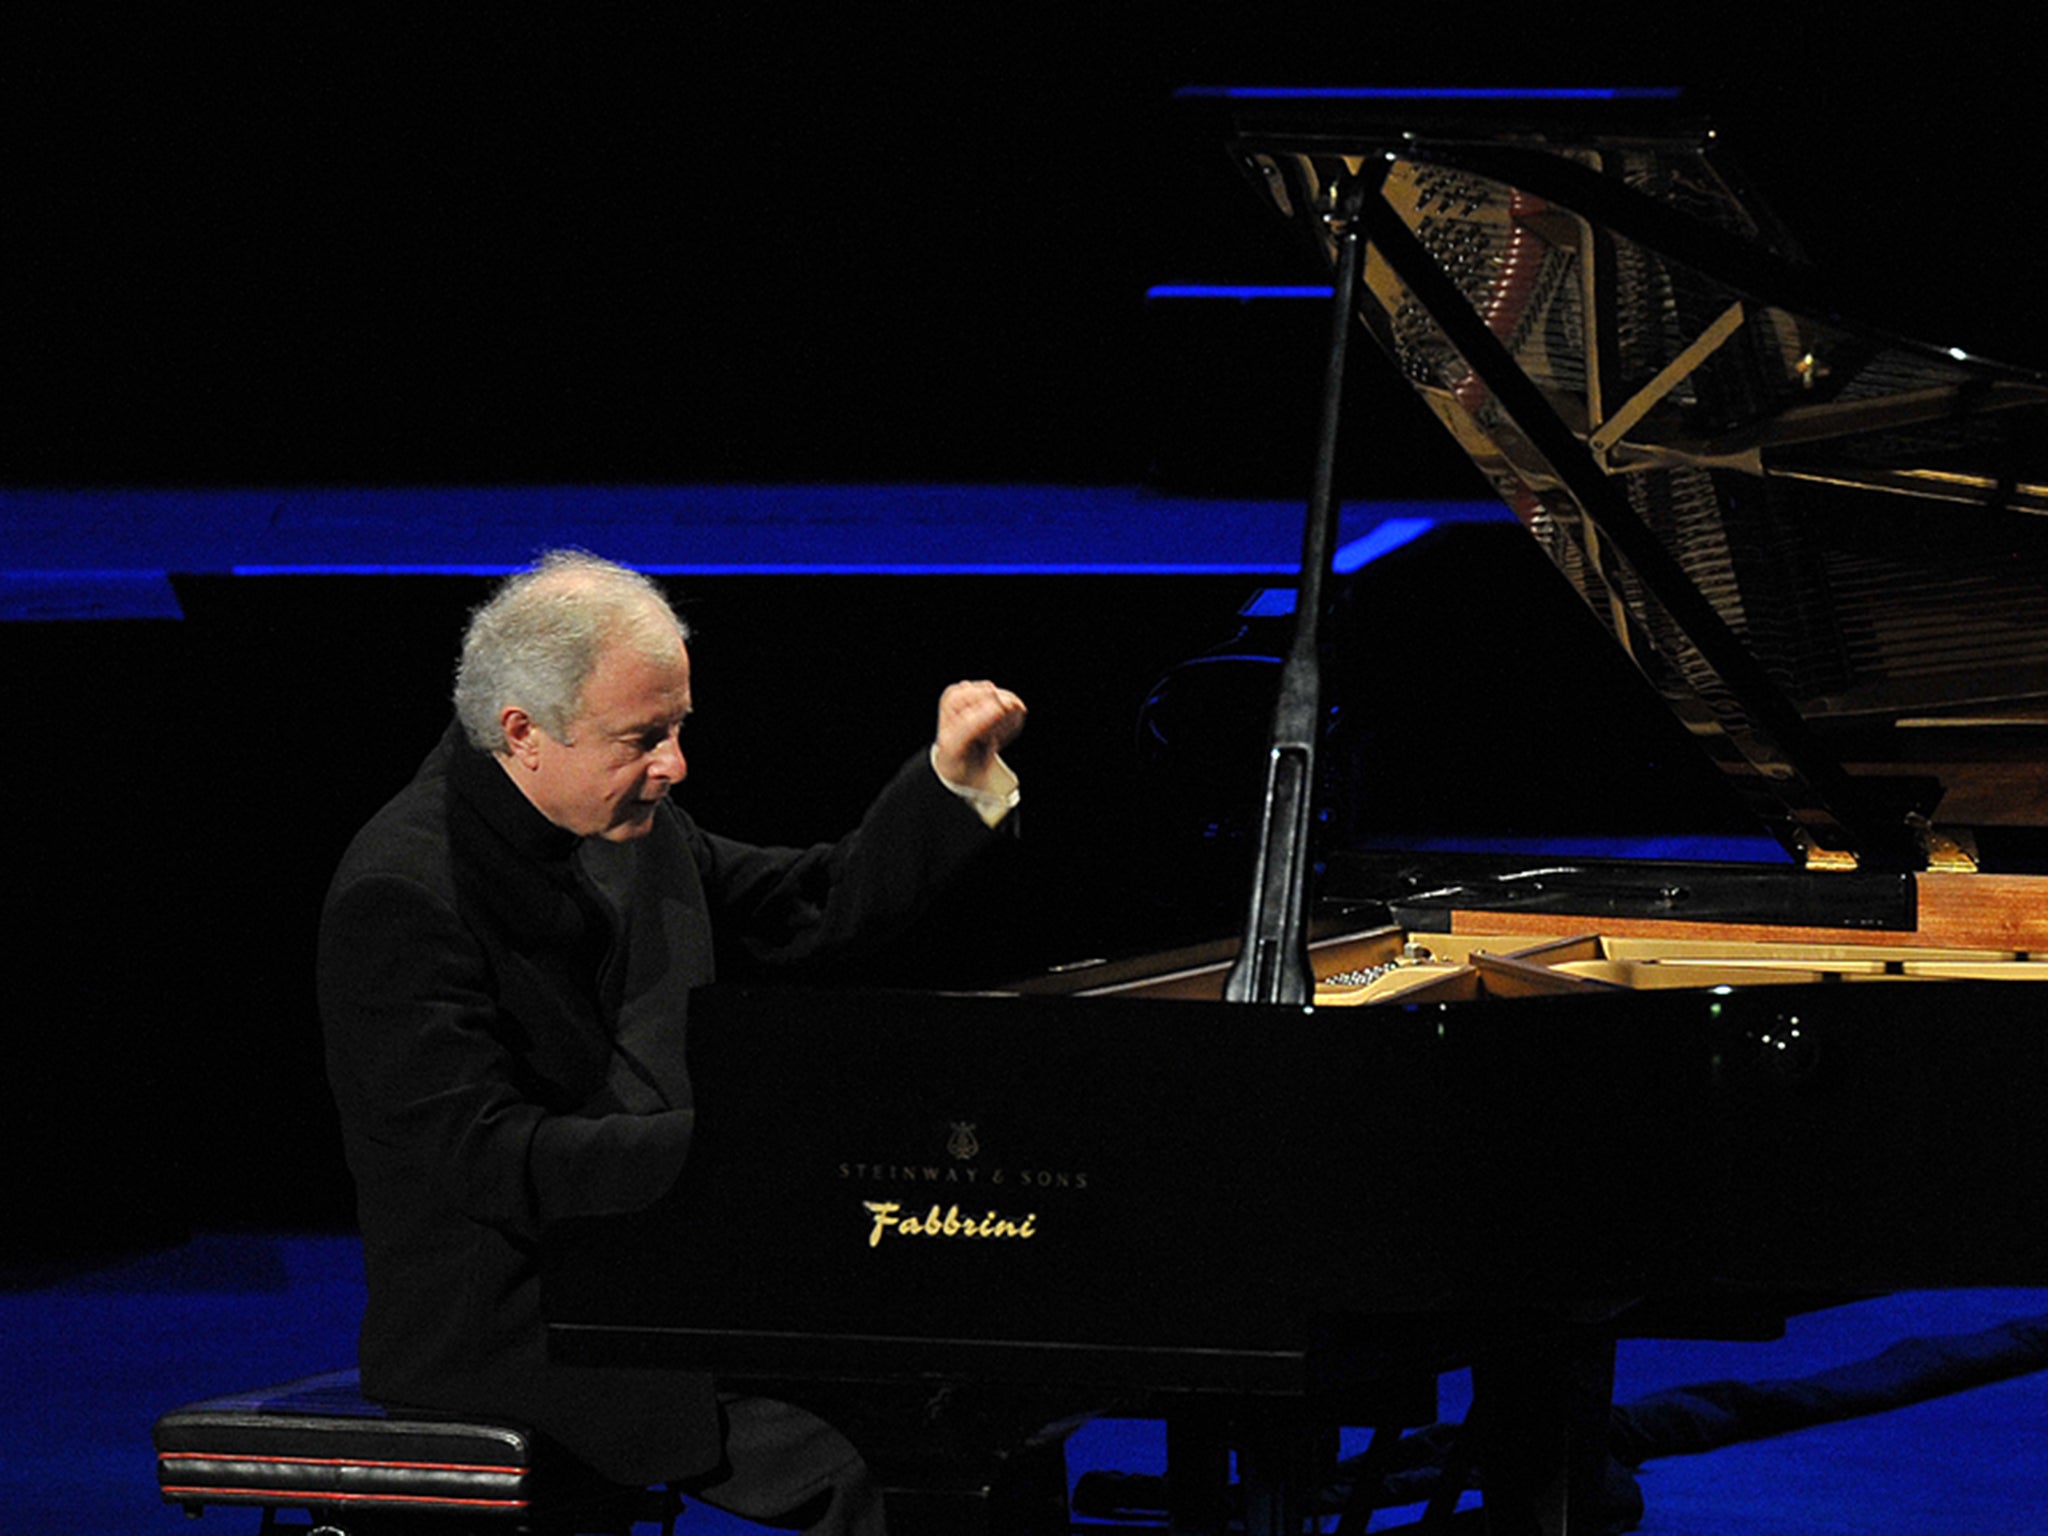 A capacity crowd watched Sir Andras Schiff's late-night recital of Bach's Goldberg Variations